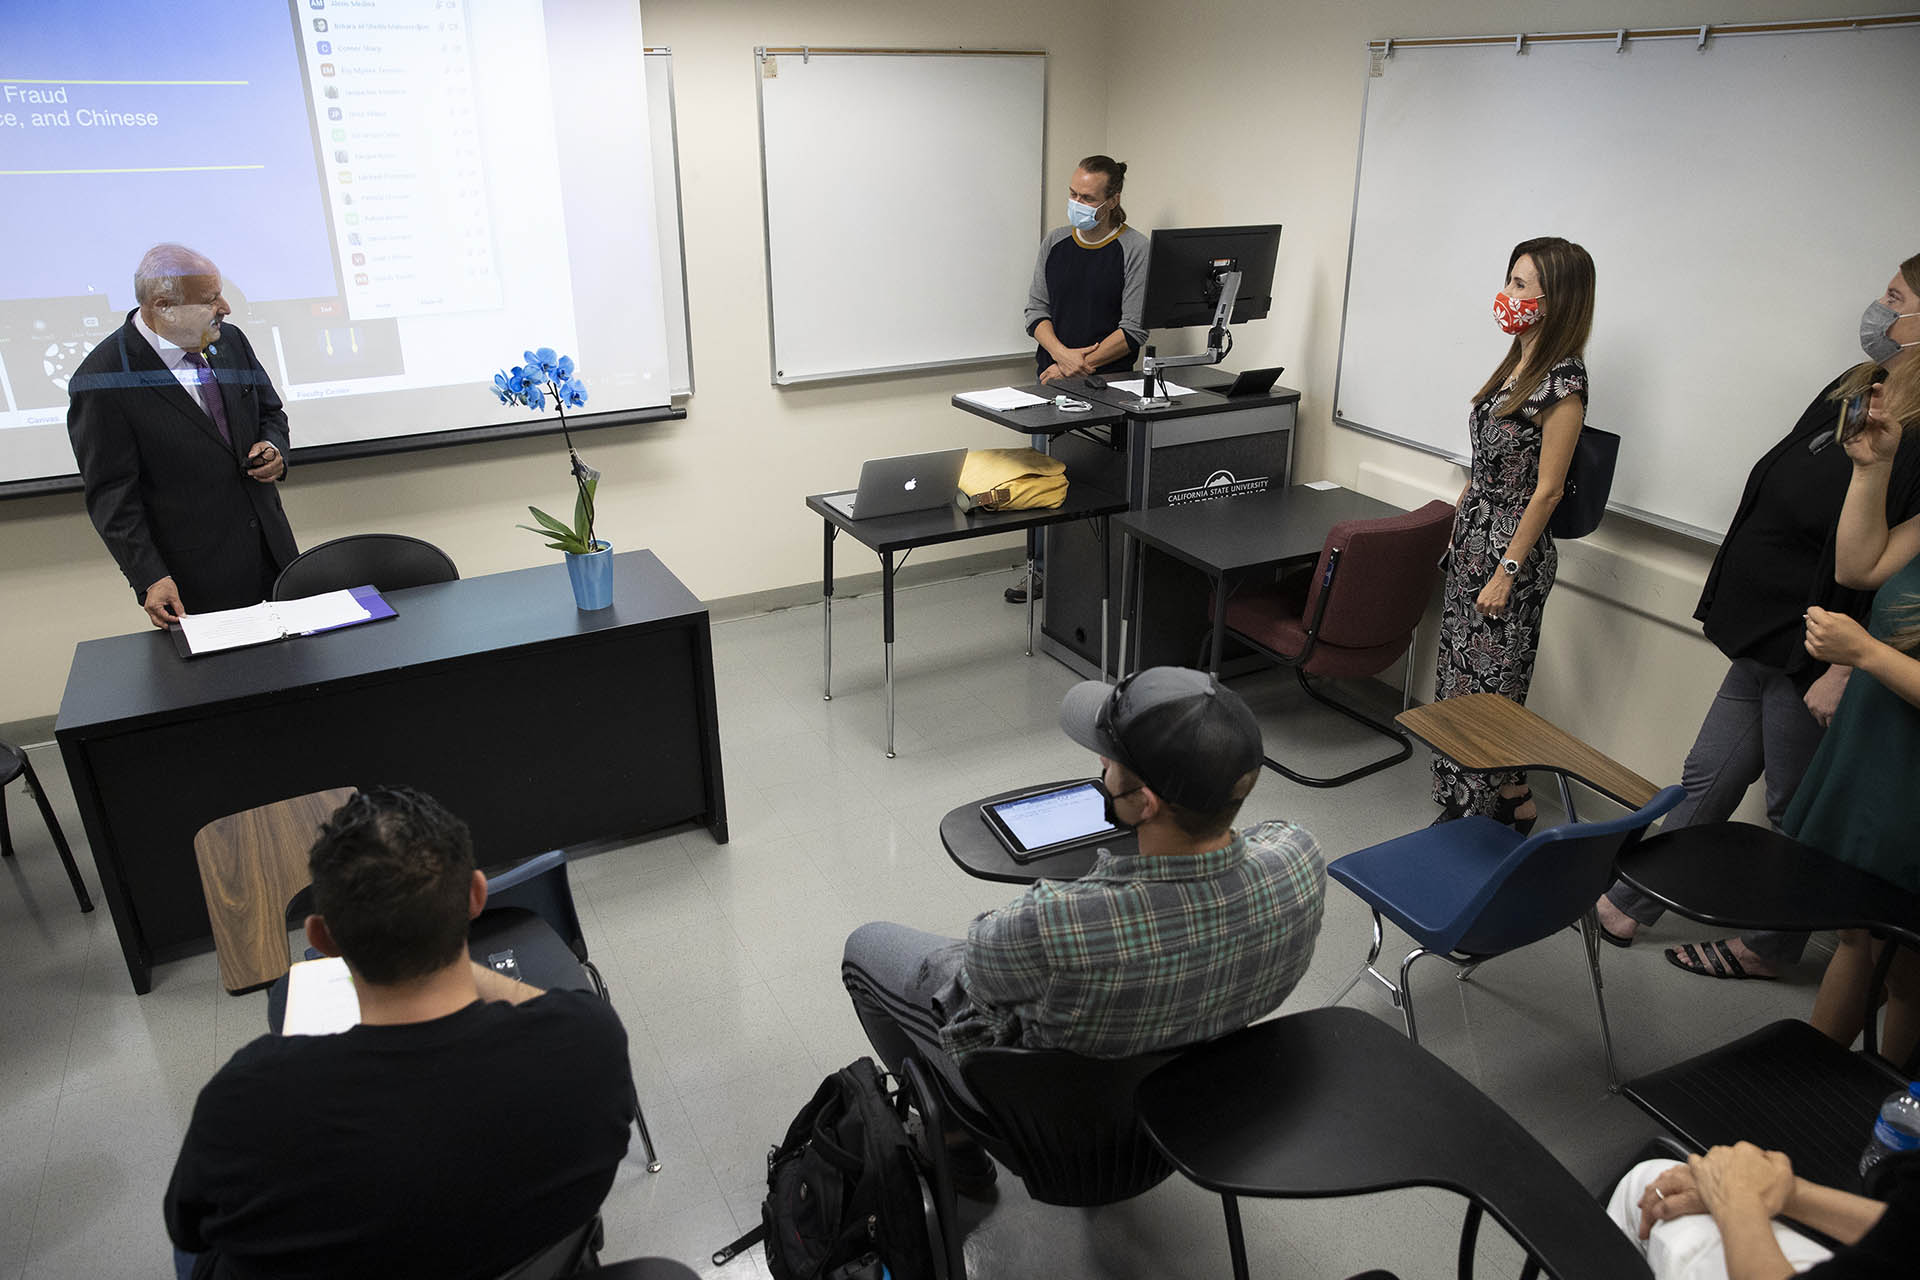 The faculty "ambush" led by university President Tomás D. Morales and fellow faculty in a class taught by Jeremy Murray, associate professor of history, to announce that hi is the 2022 Outstanding Faculty Advisor.